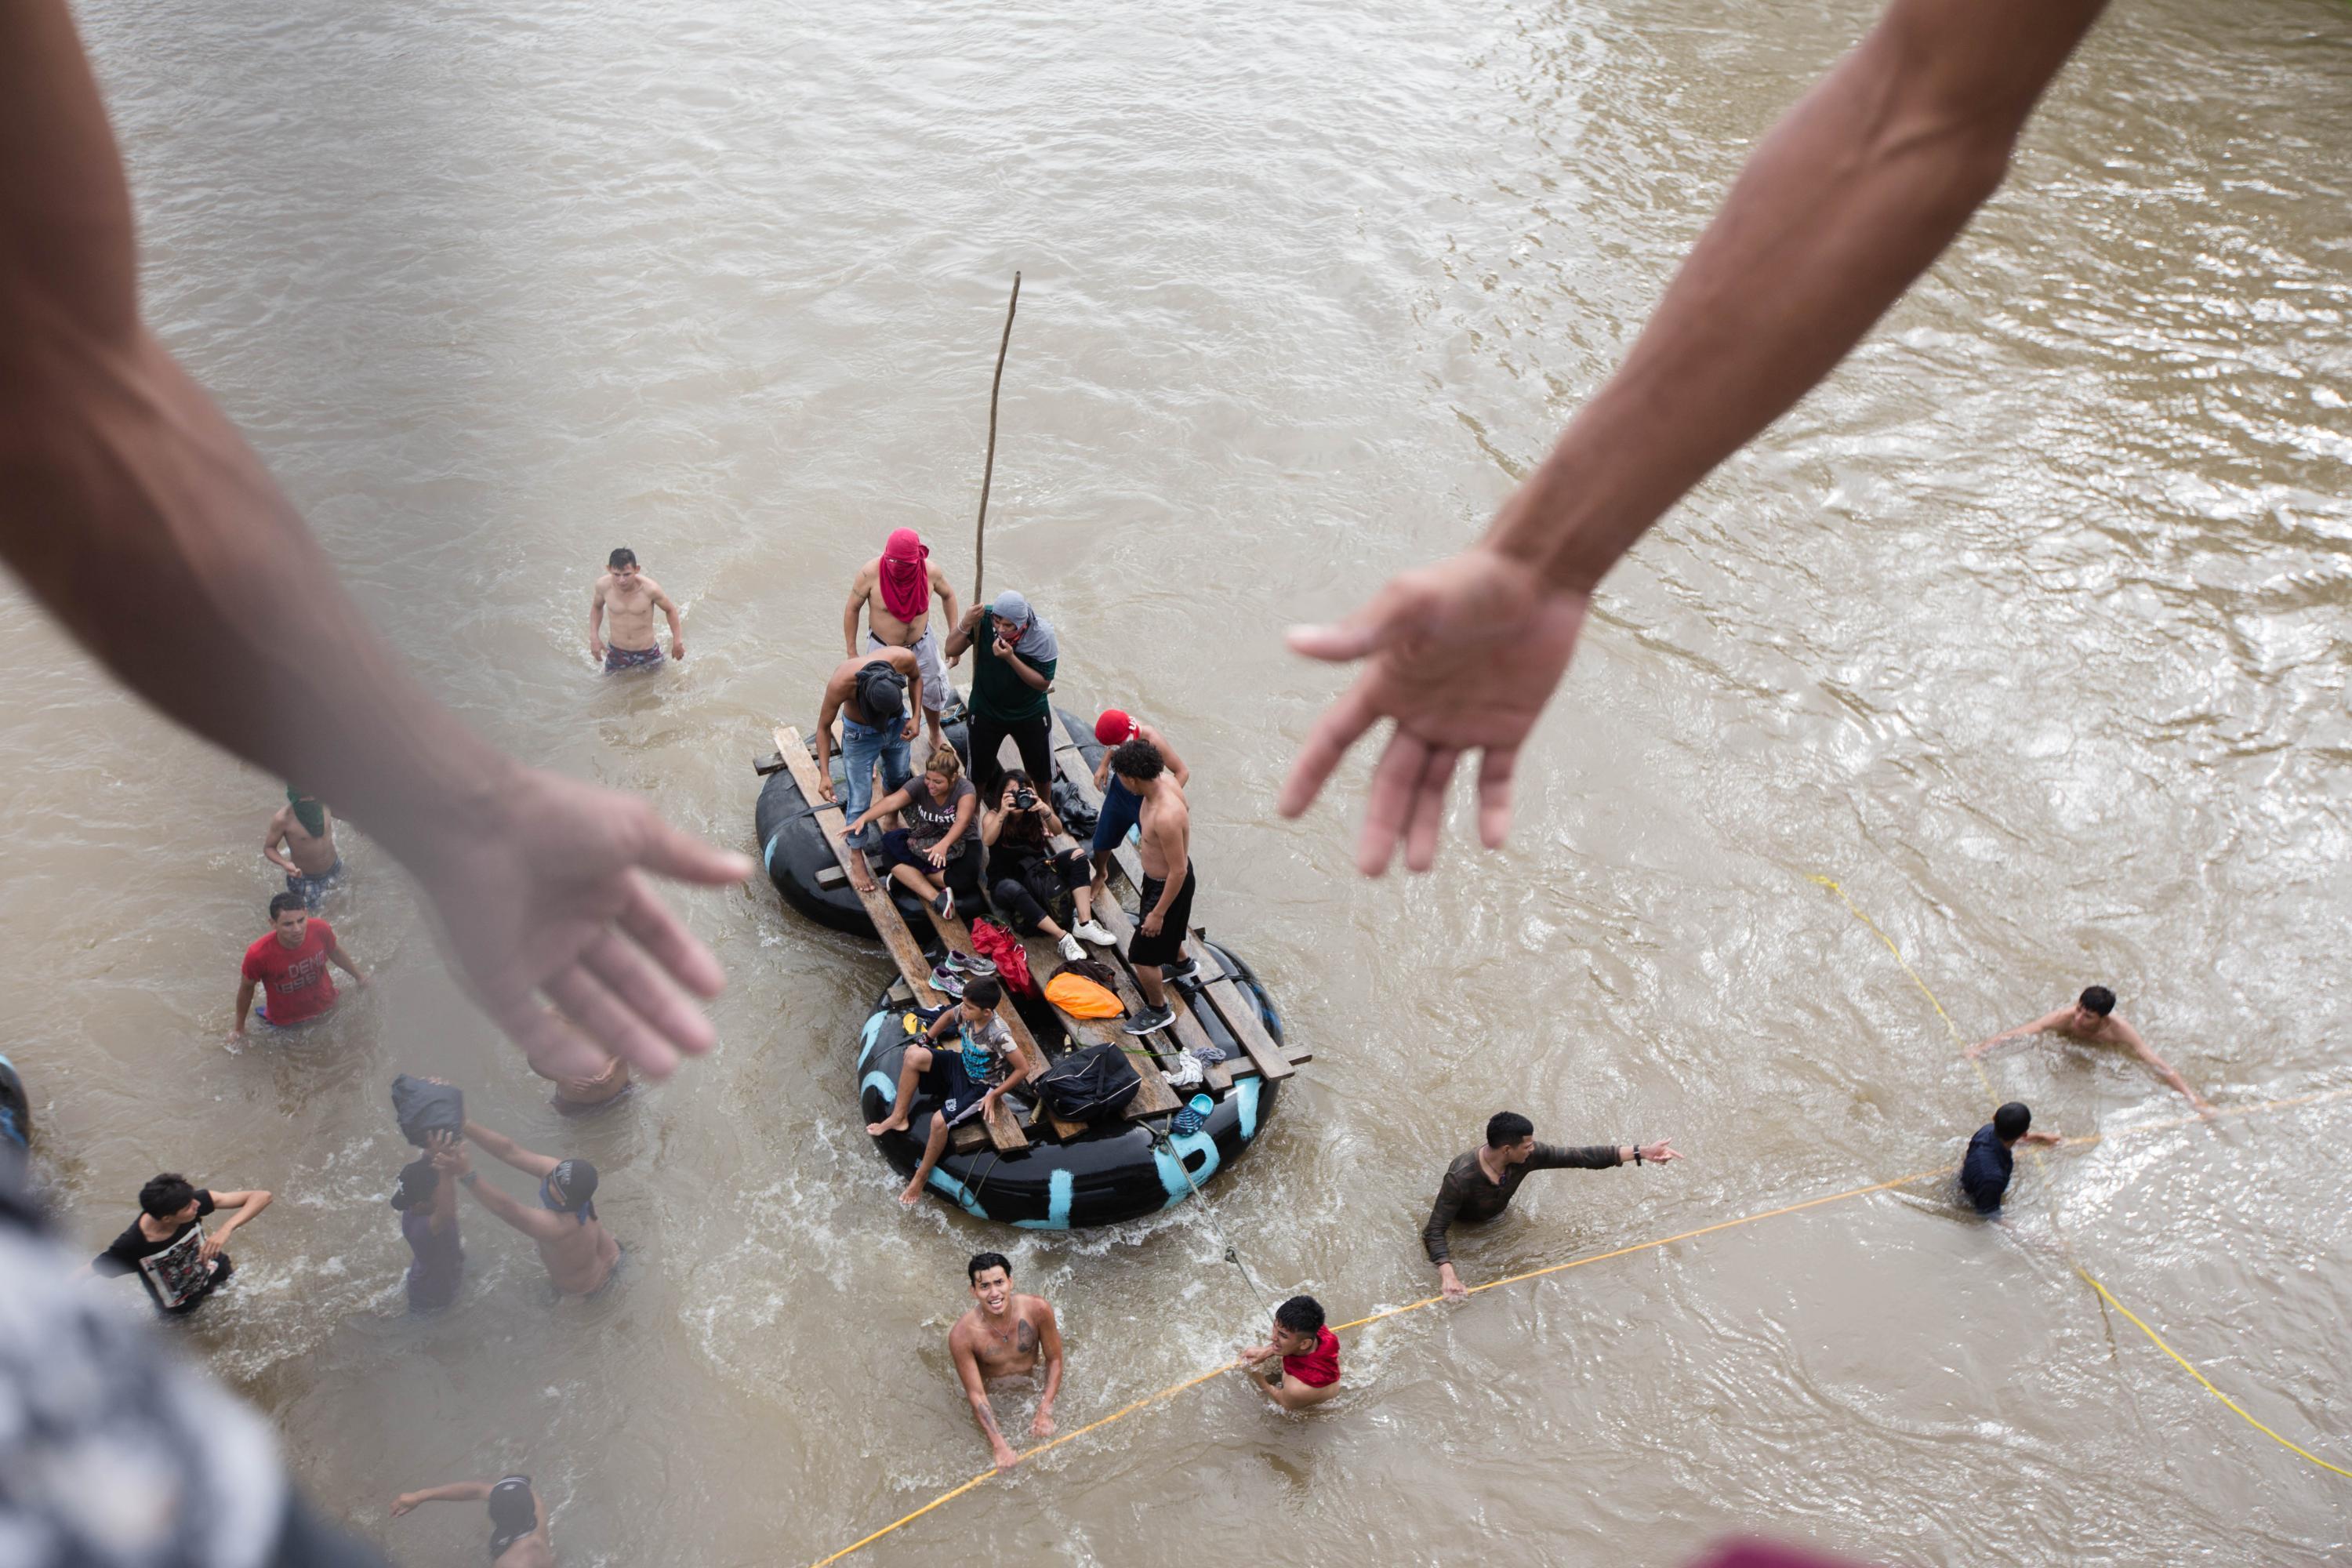 Several Mexican raftsmen approach the border bridge between Guatemala and Mexico as they encouraged migrants to jump into the Suchiate river, bringing them to Mexican shore. (El Faro/Archive)